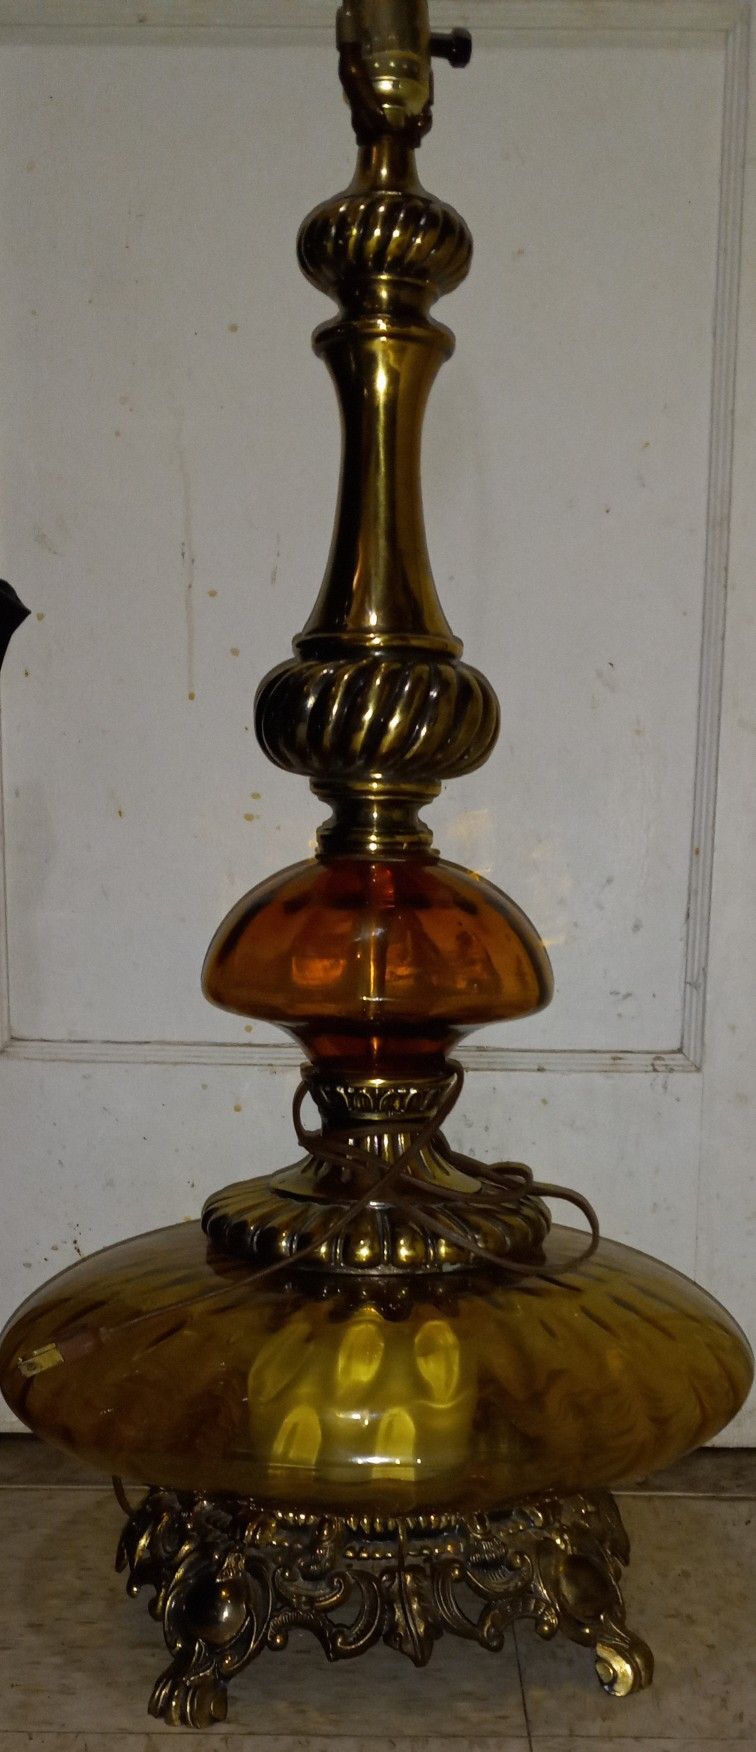 Vintage Lamp, Stunning. MUST SELL, FAMILY EMERGENCY 